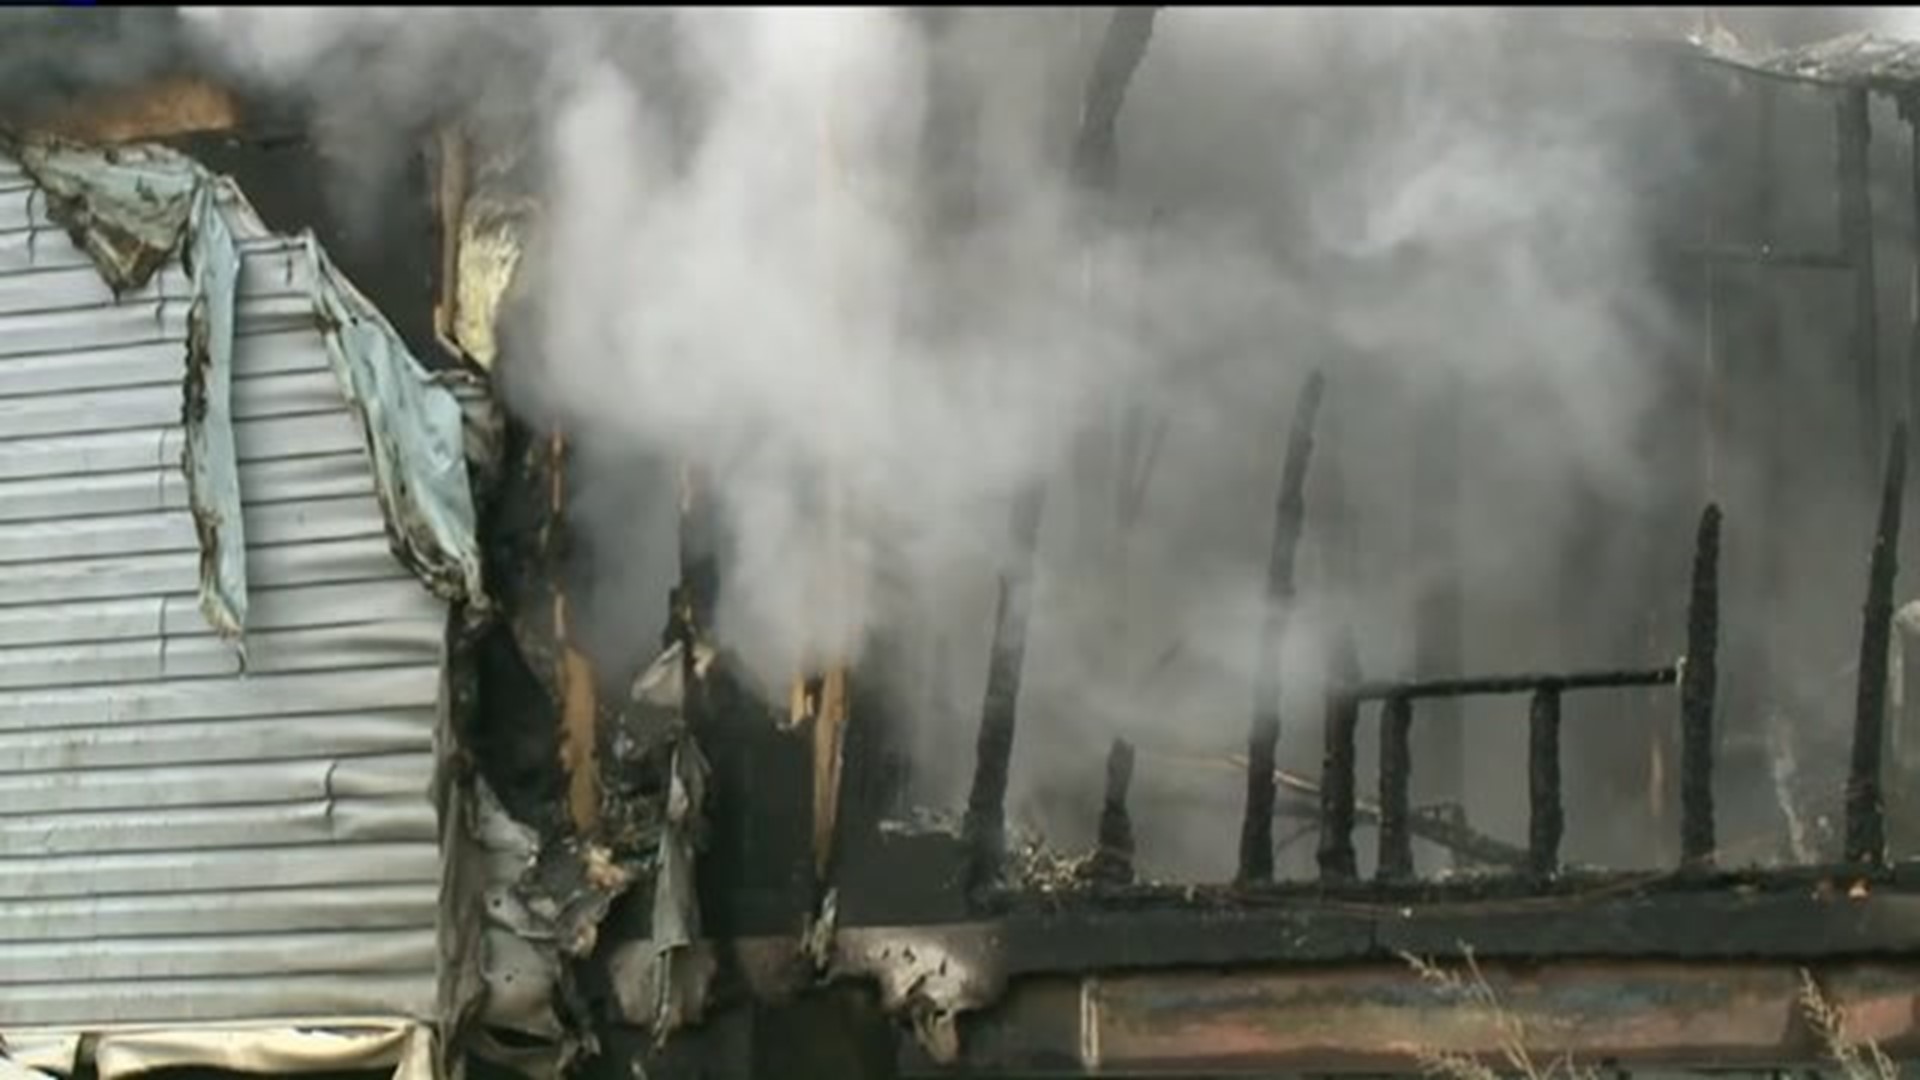 Dogs Killed, Home Destroyed in Fire